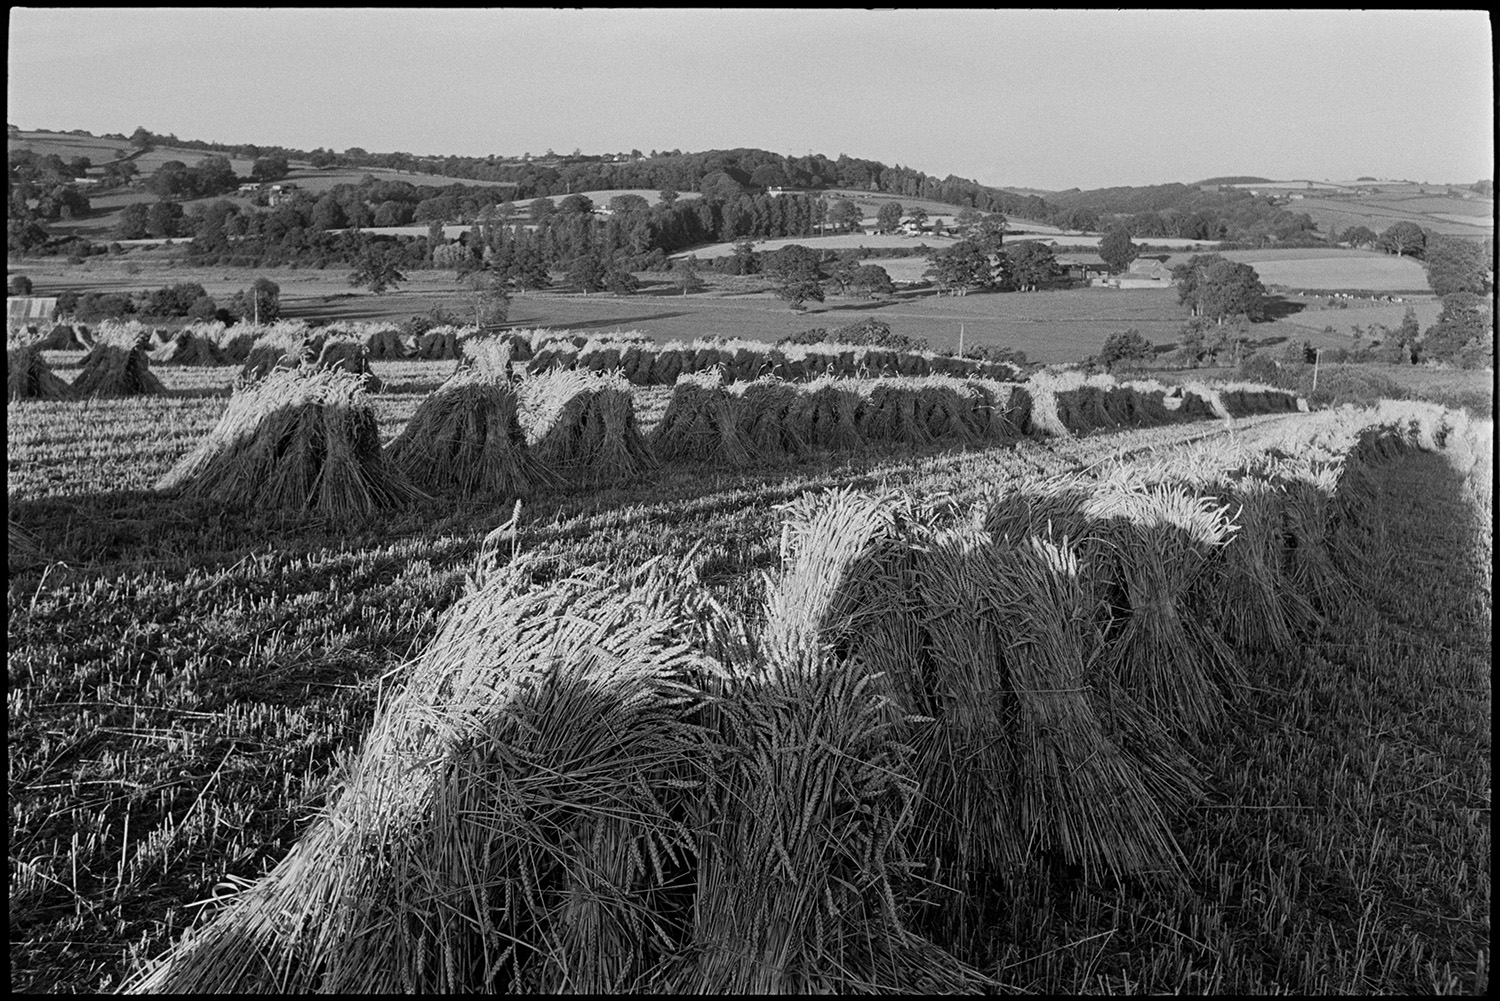 Corn stooks in evening sun.
[Rows of sunlit stooks of corn in a field near Ashreigney.  In the distance hills with fields and trees can be seen.]